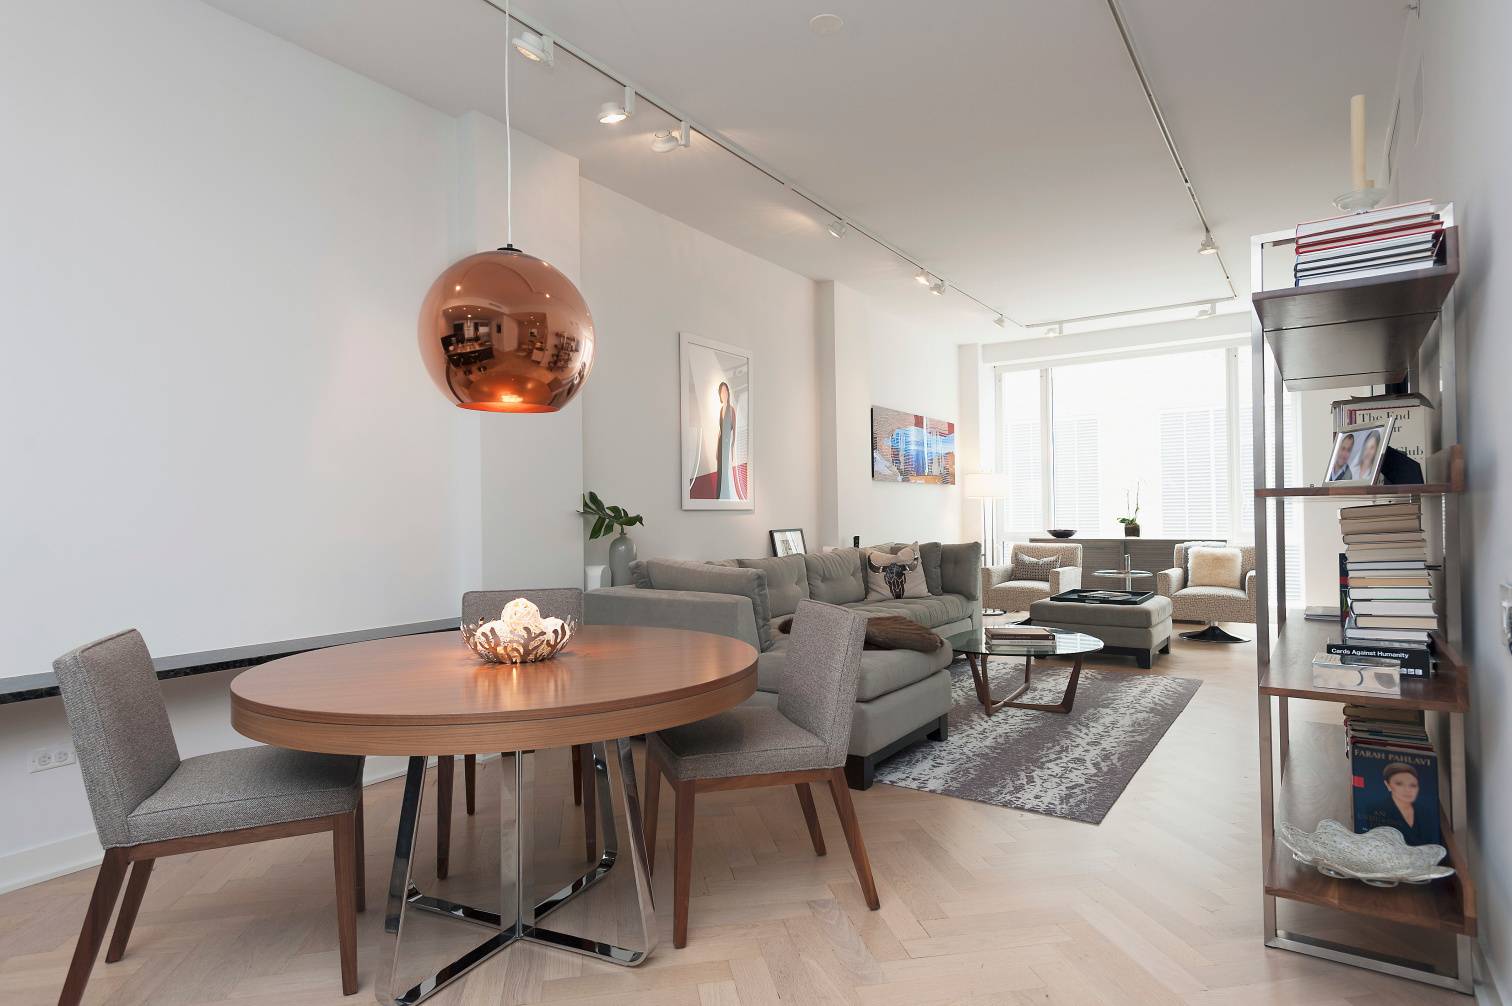 Move right in to this spacious, light filled 2 bed, 2 bath apartment located in the iconic Philip Johnson Annabelle Selldorf designed Urban Glass House in West SoHo Hudson Square.